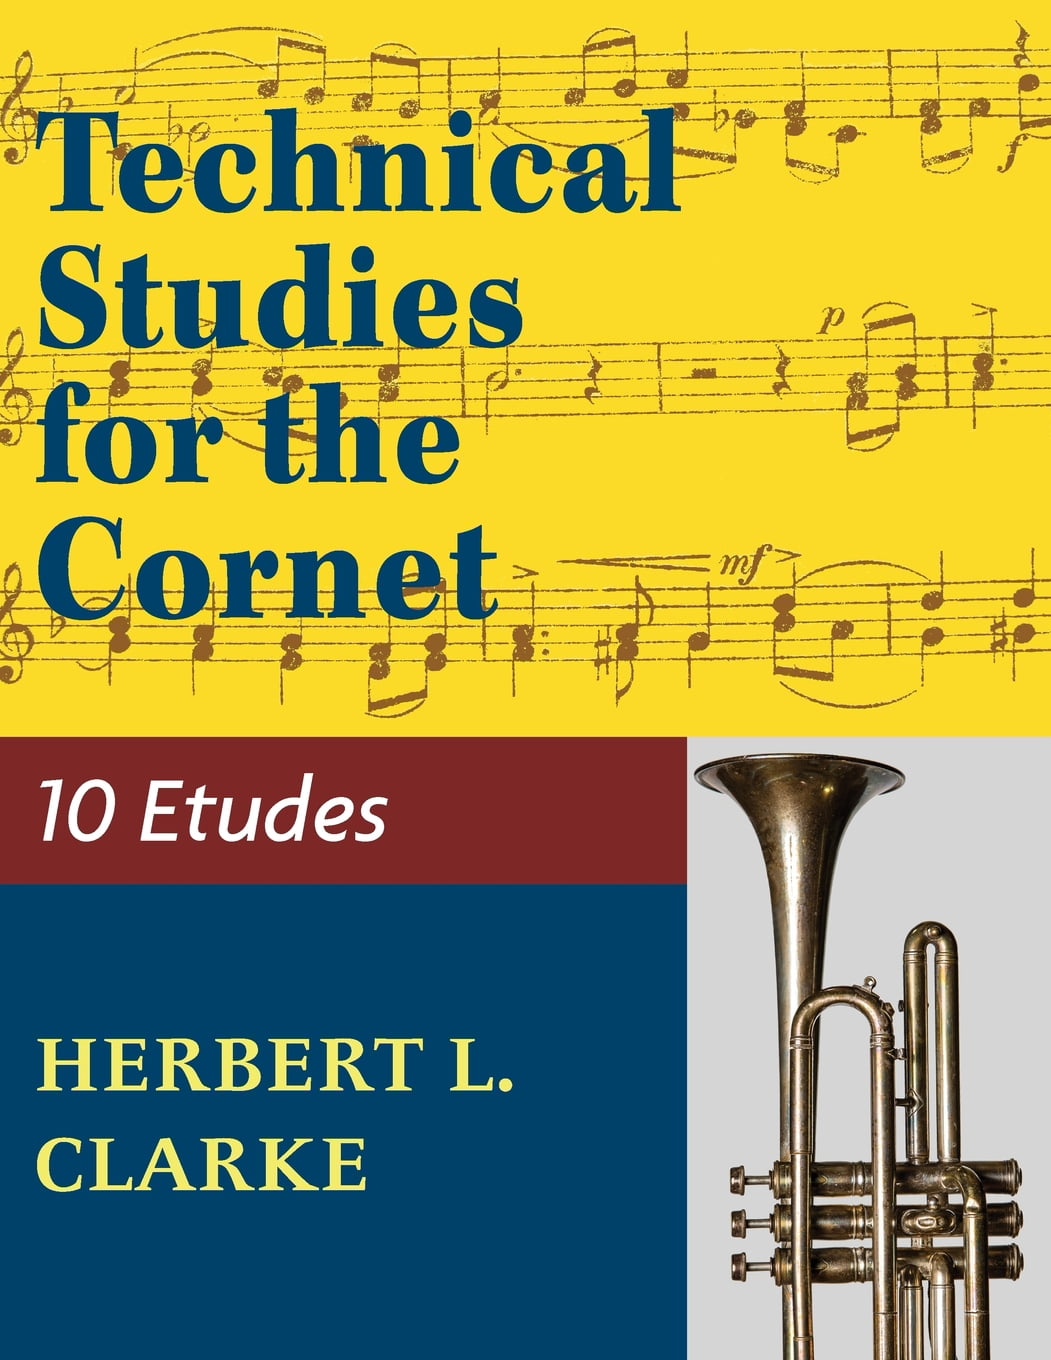 Technical Studies for the Cornet English German and French Edition
Epub-Ebook